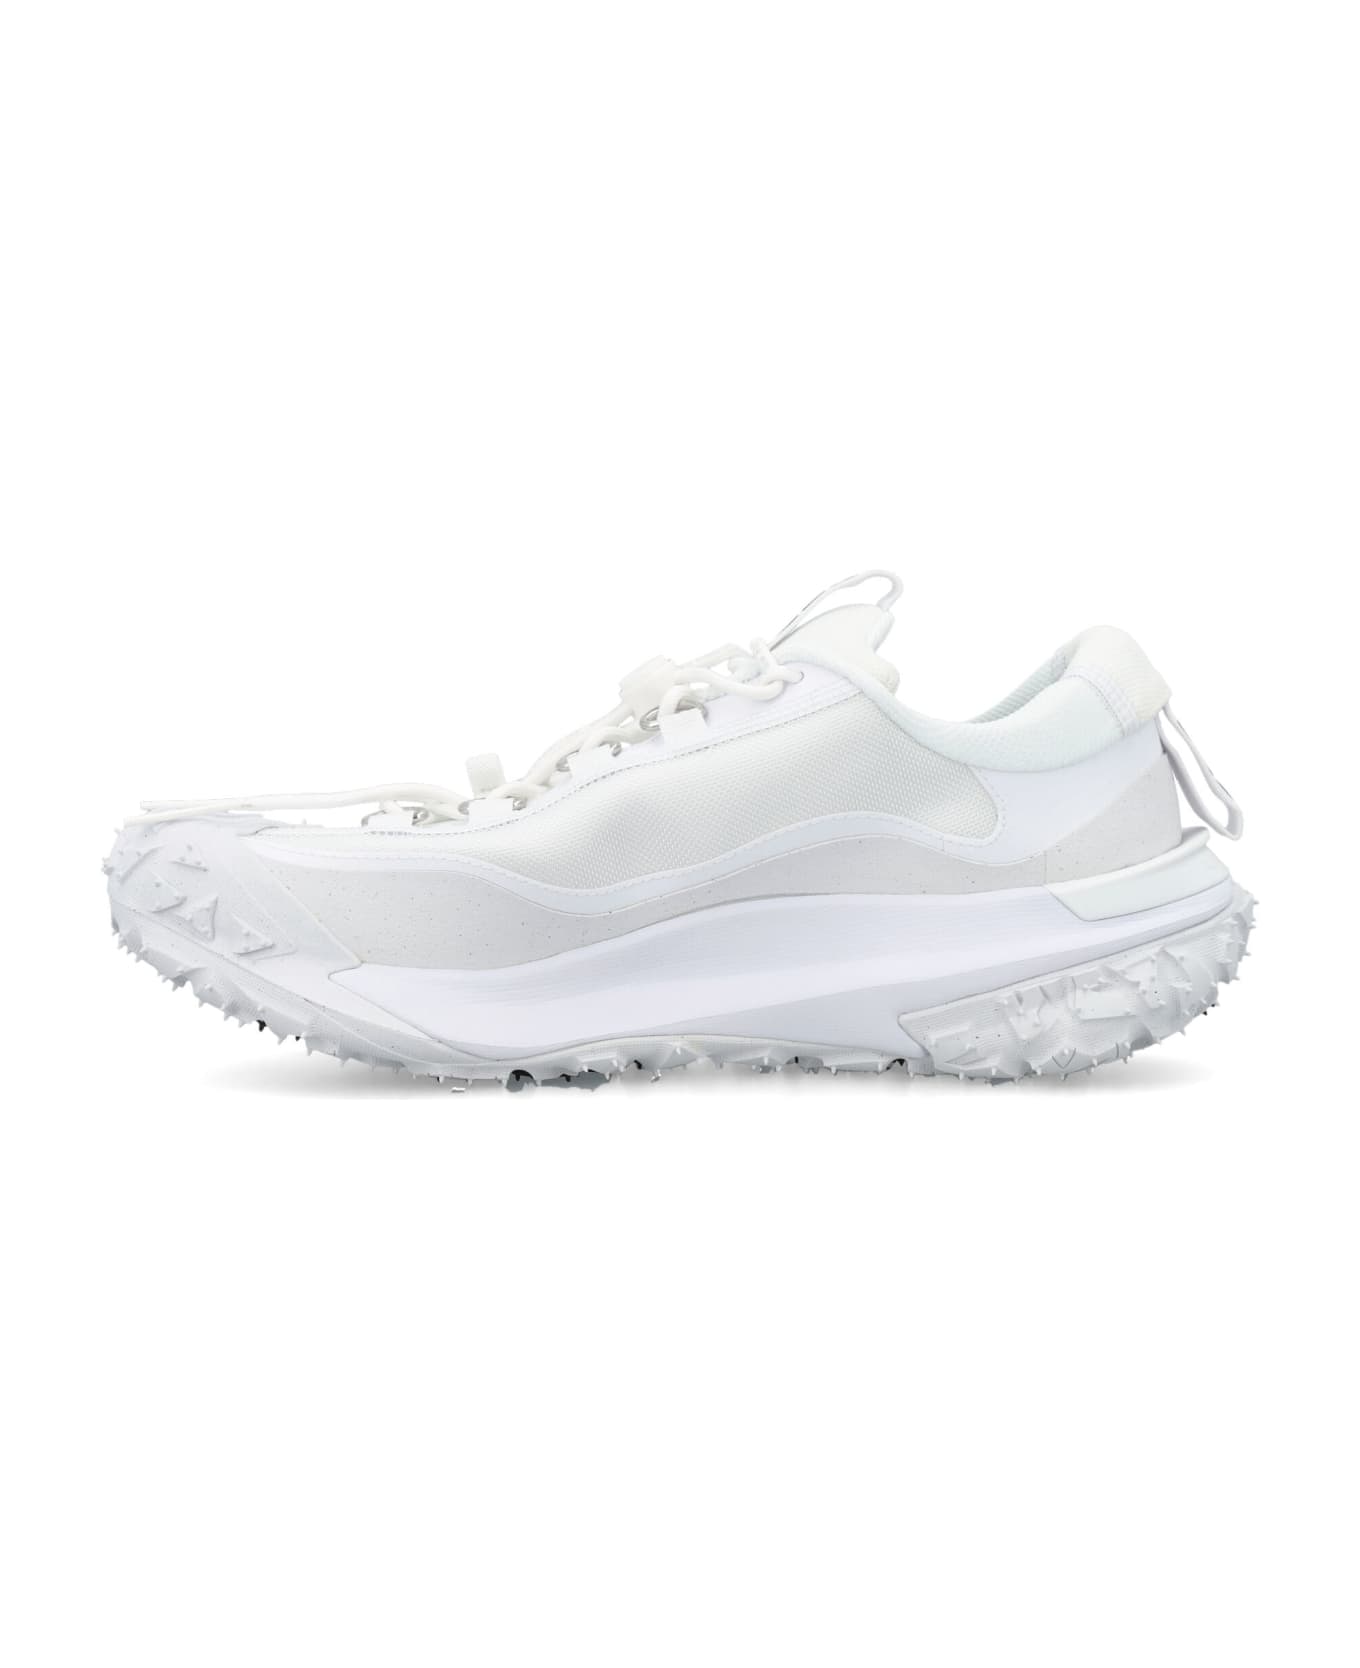 white pointed ankle boots Acg Mountain Fly 2 Low - WHITE